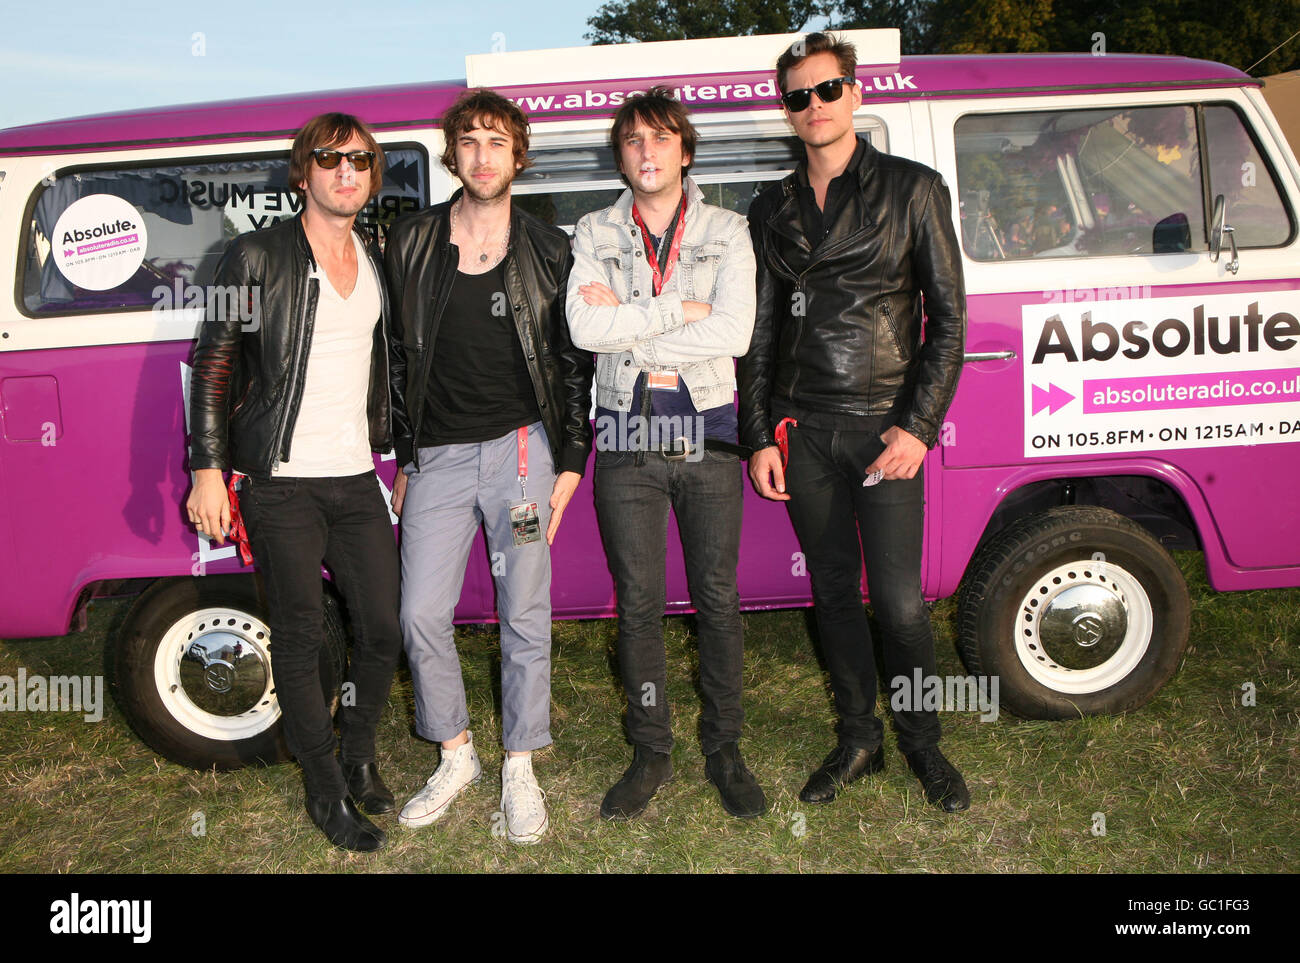 Jet backstage in the Absolute Radio VIP area during the Virgin Media V Festival at Hylands Park, Chelmsford, Essex. PRESS ASSOCIATION Photo. Picture date: Saturday August 22, 2009. Photo credit should read: PA Wire Stock Photo